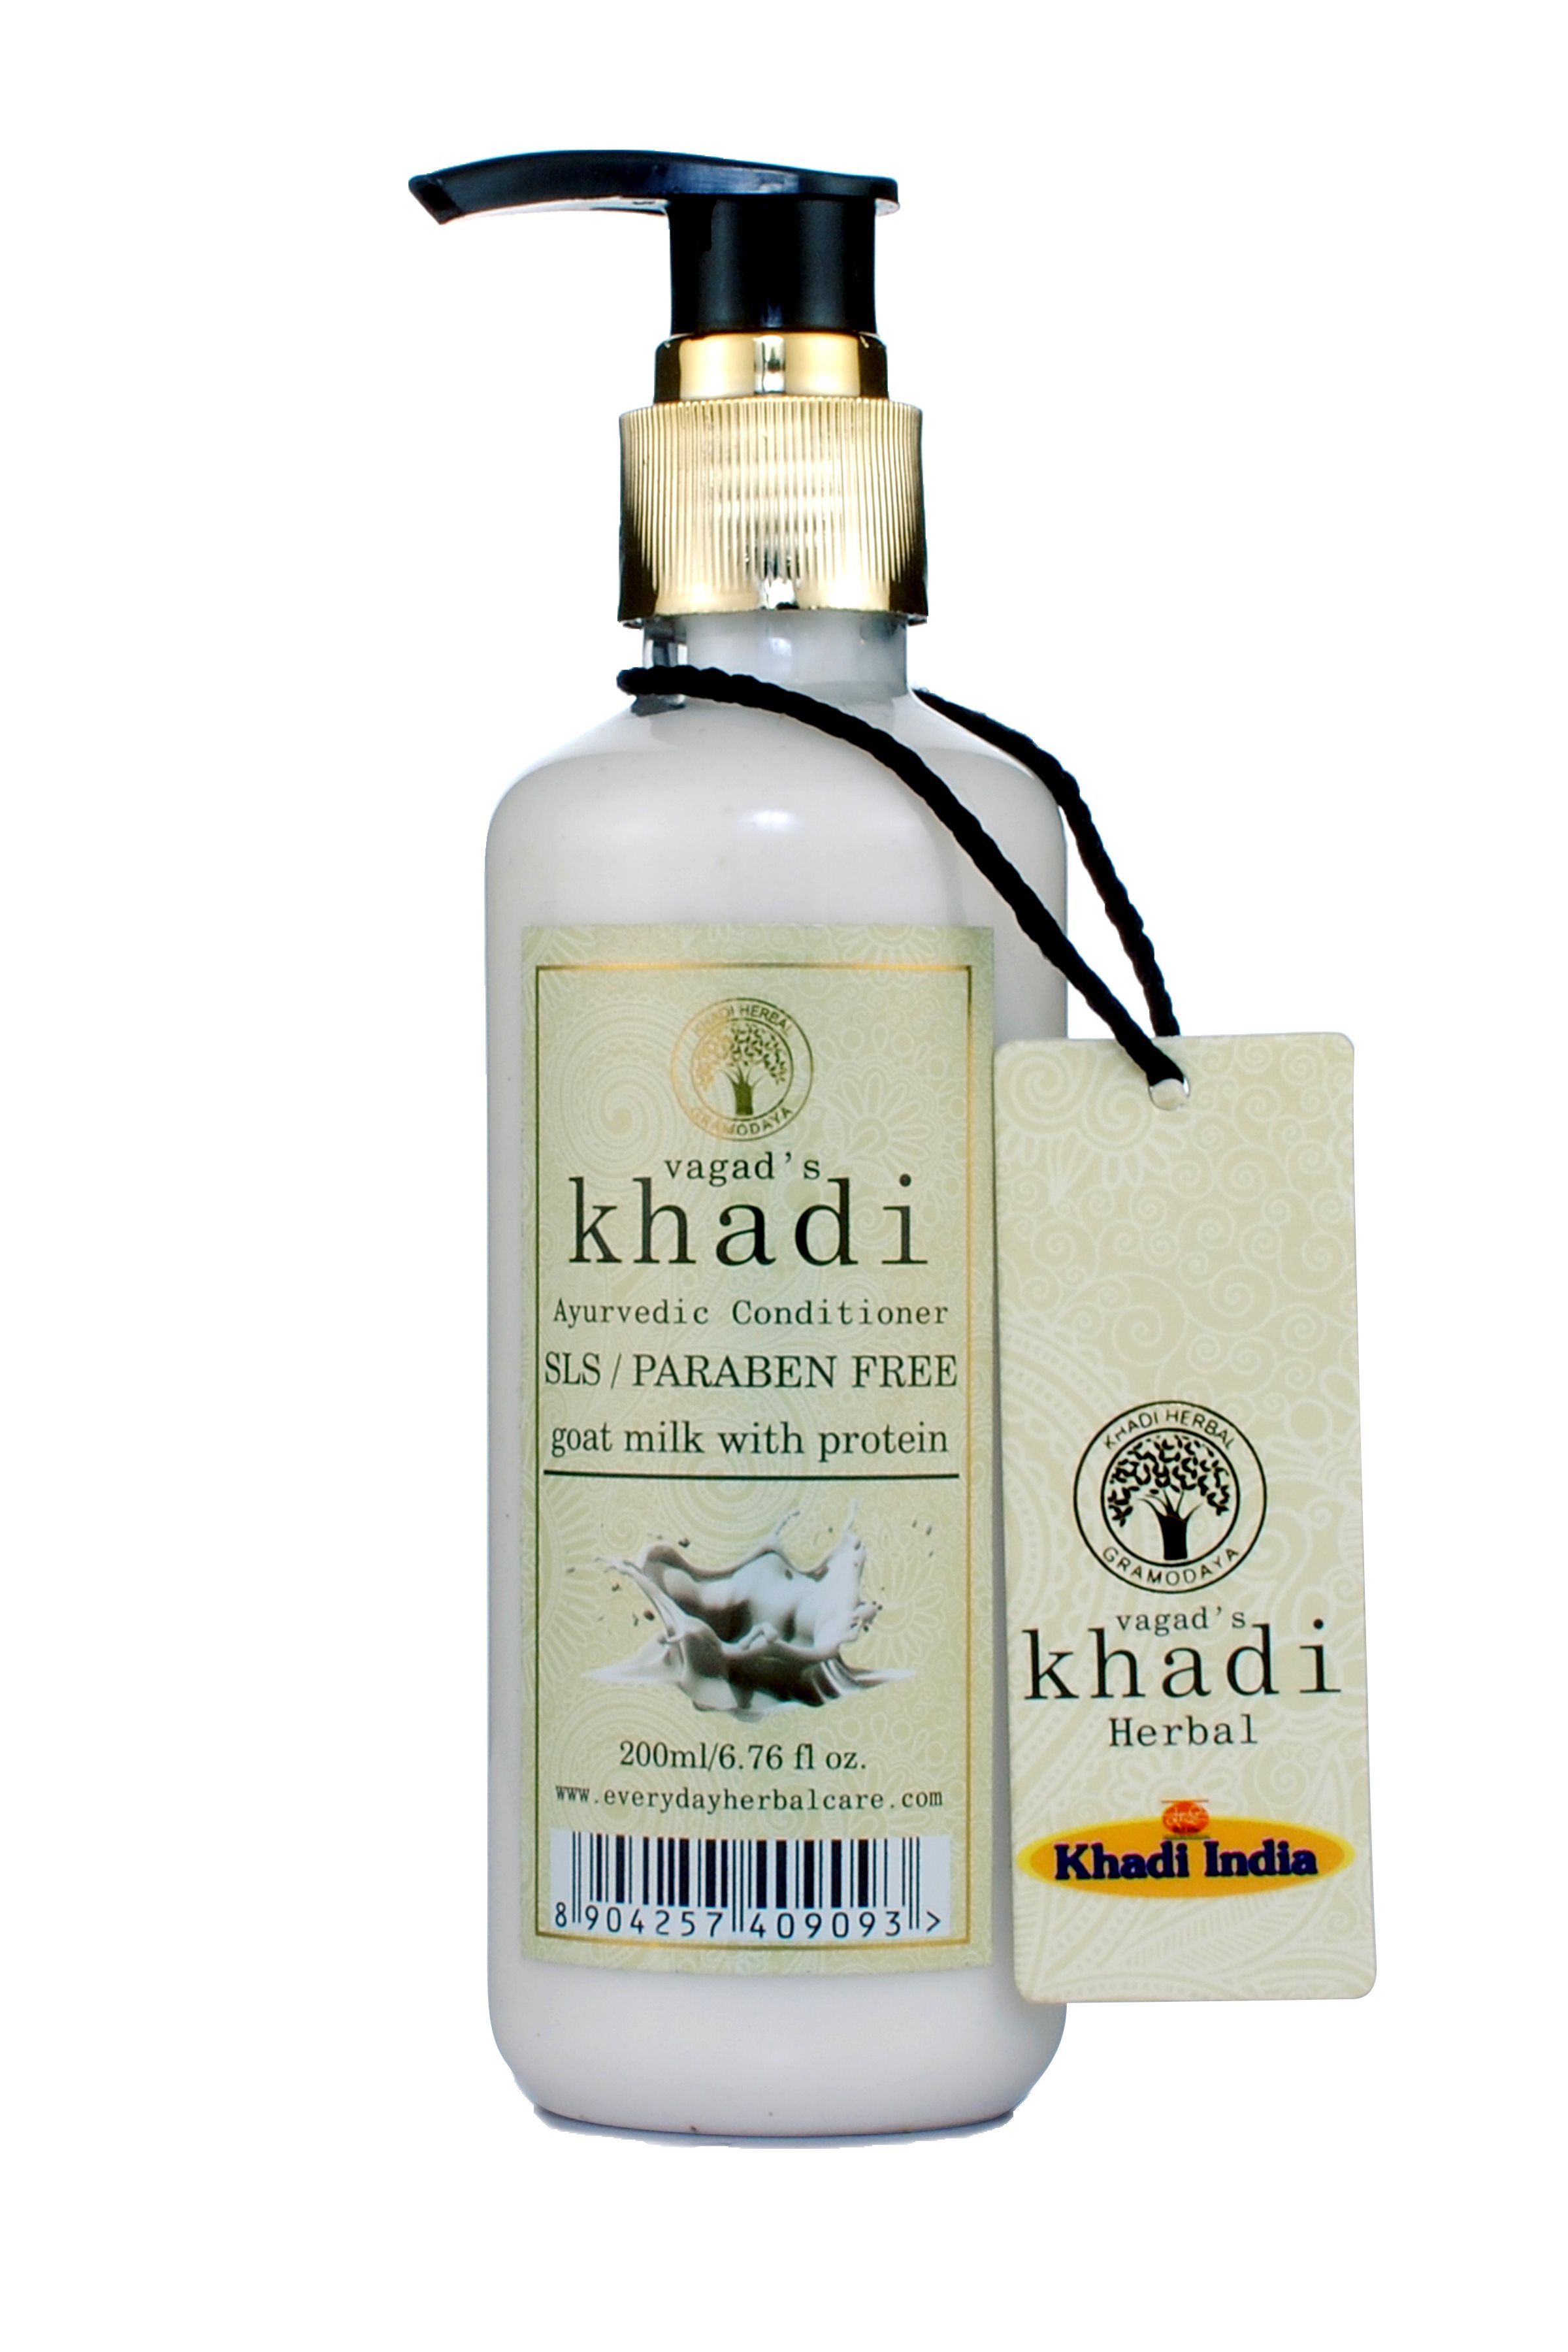 Vagad's Khadi Goat Milk With Protein S L S And Paraben Free Conditioner